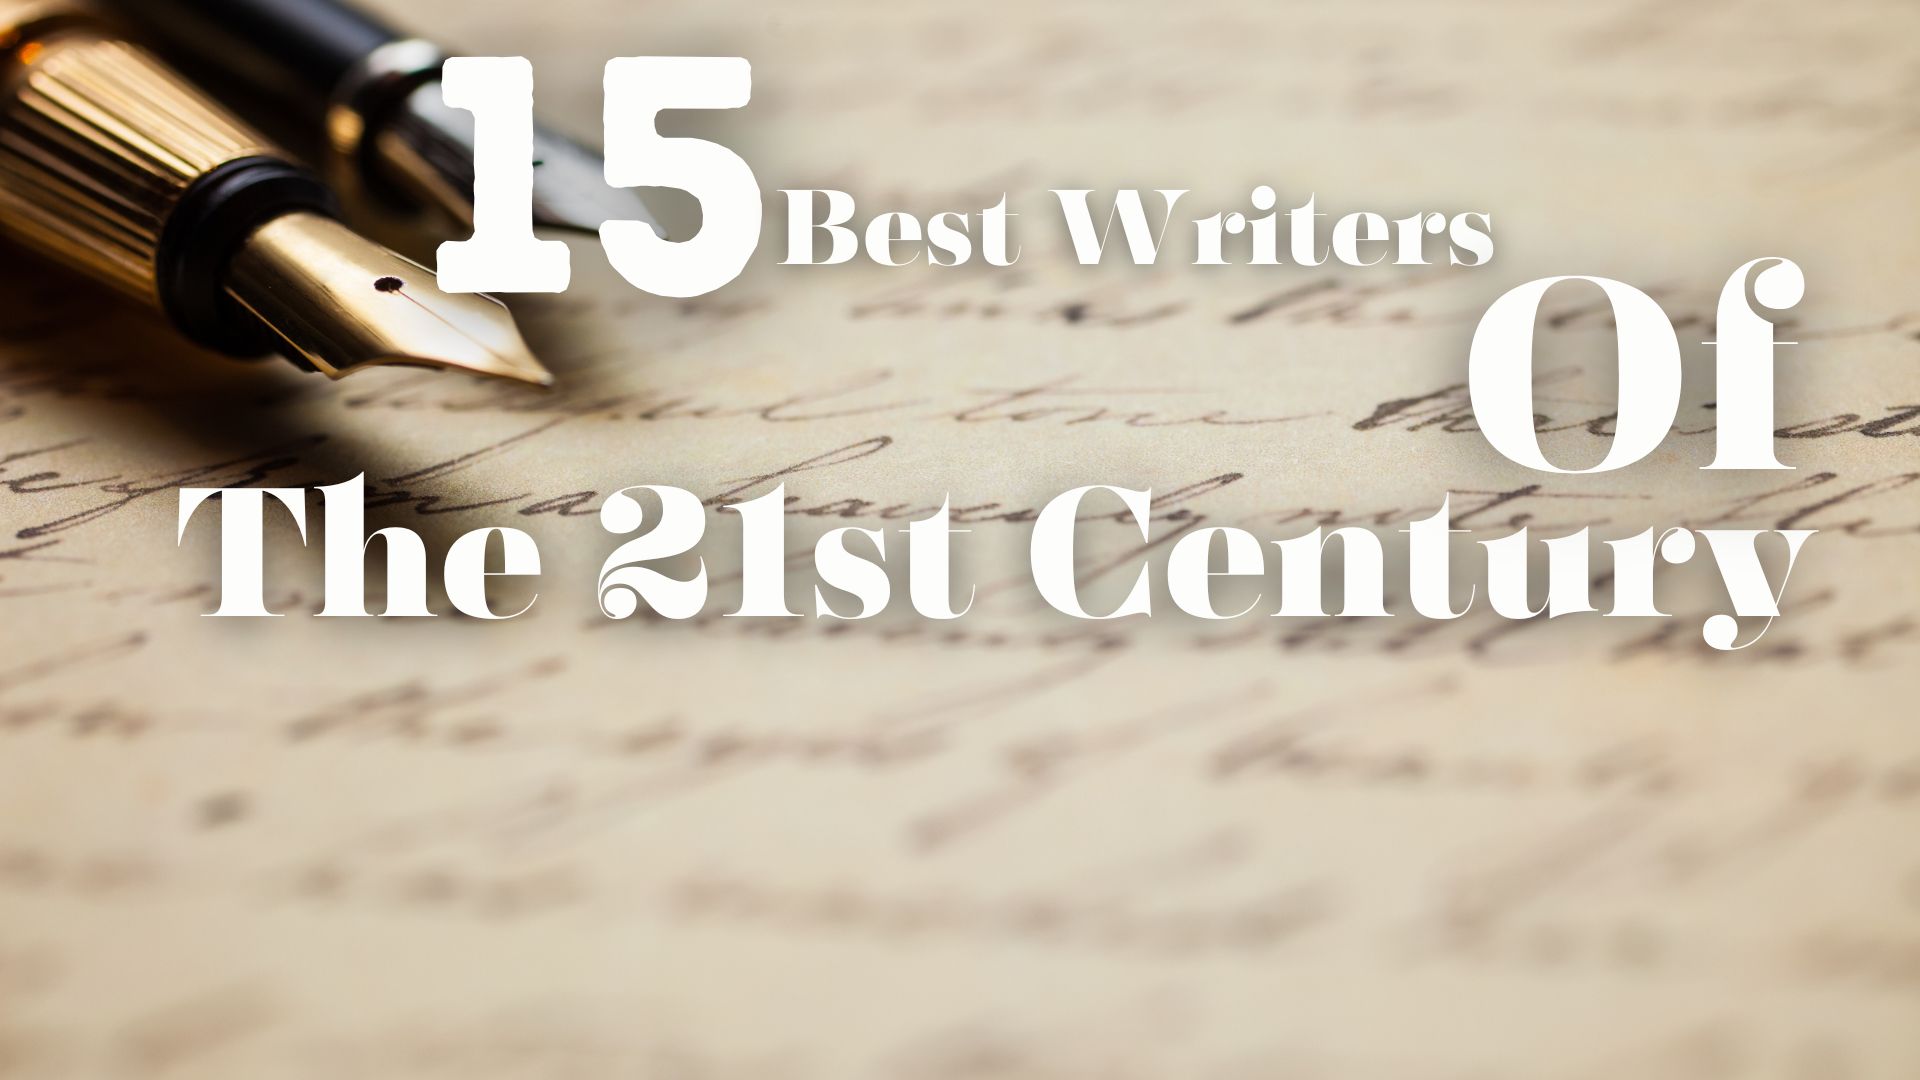 15 Best Writers Of The 21st Century